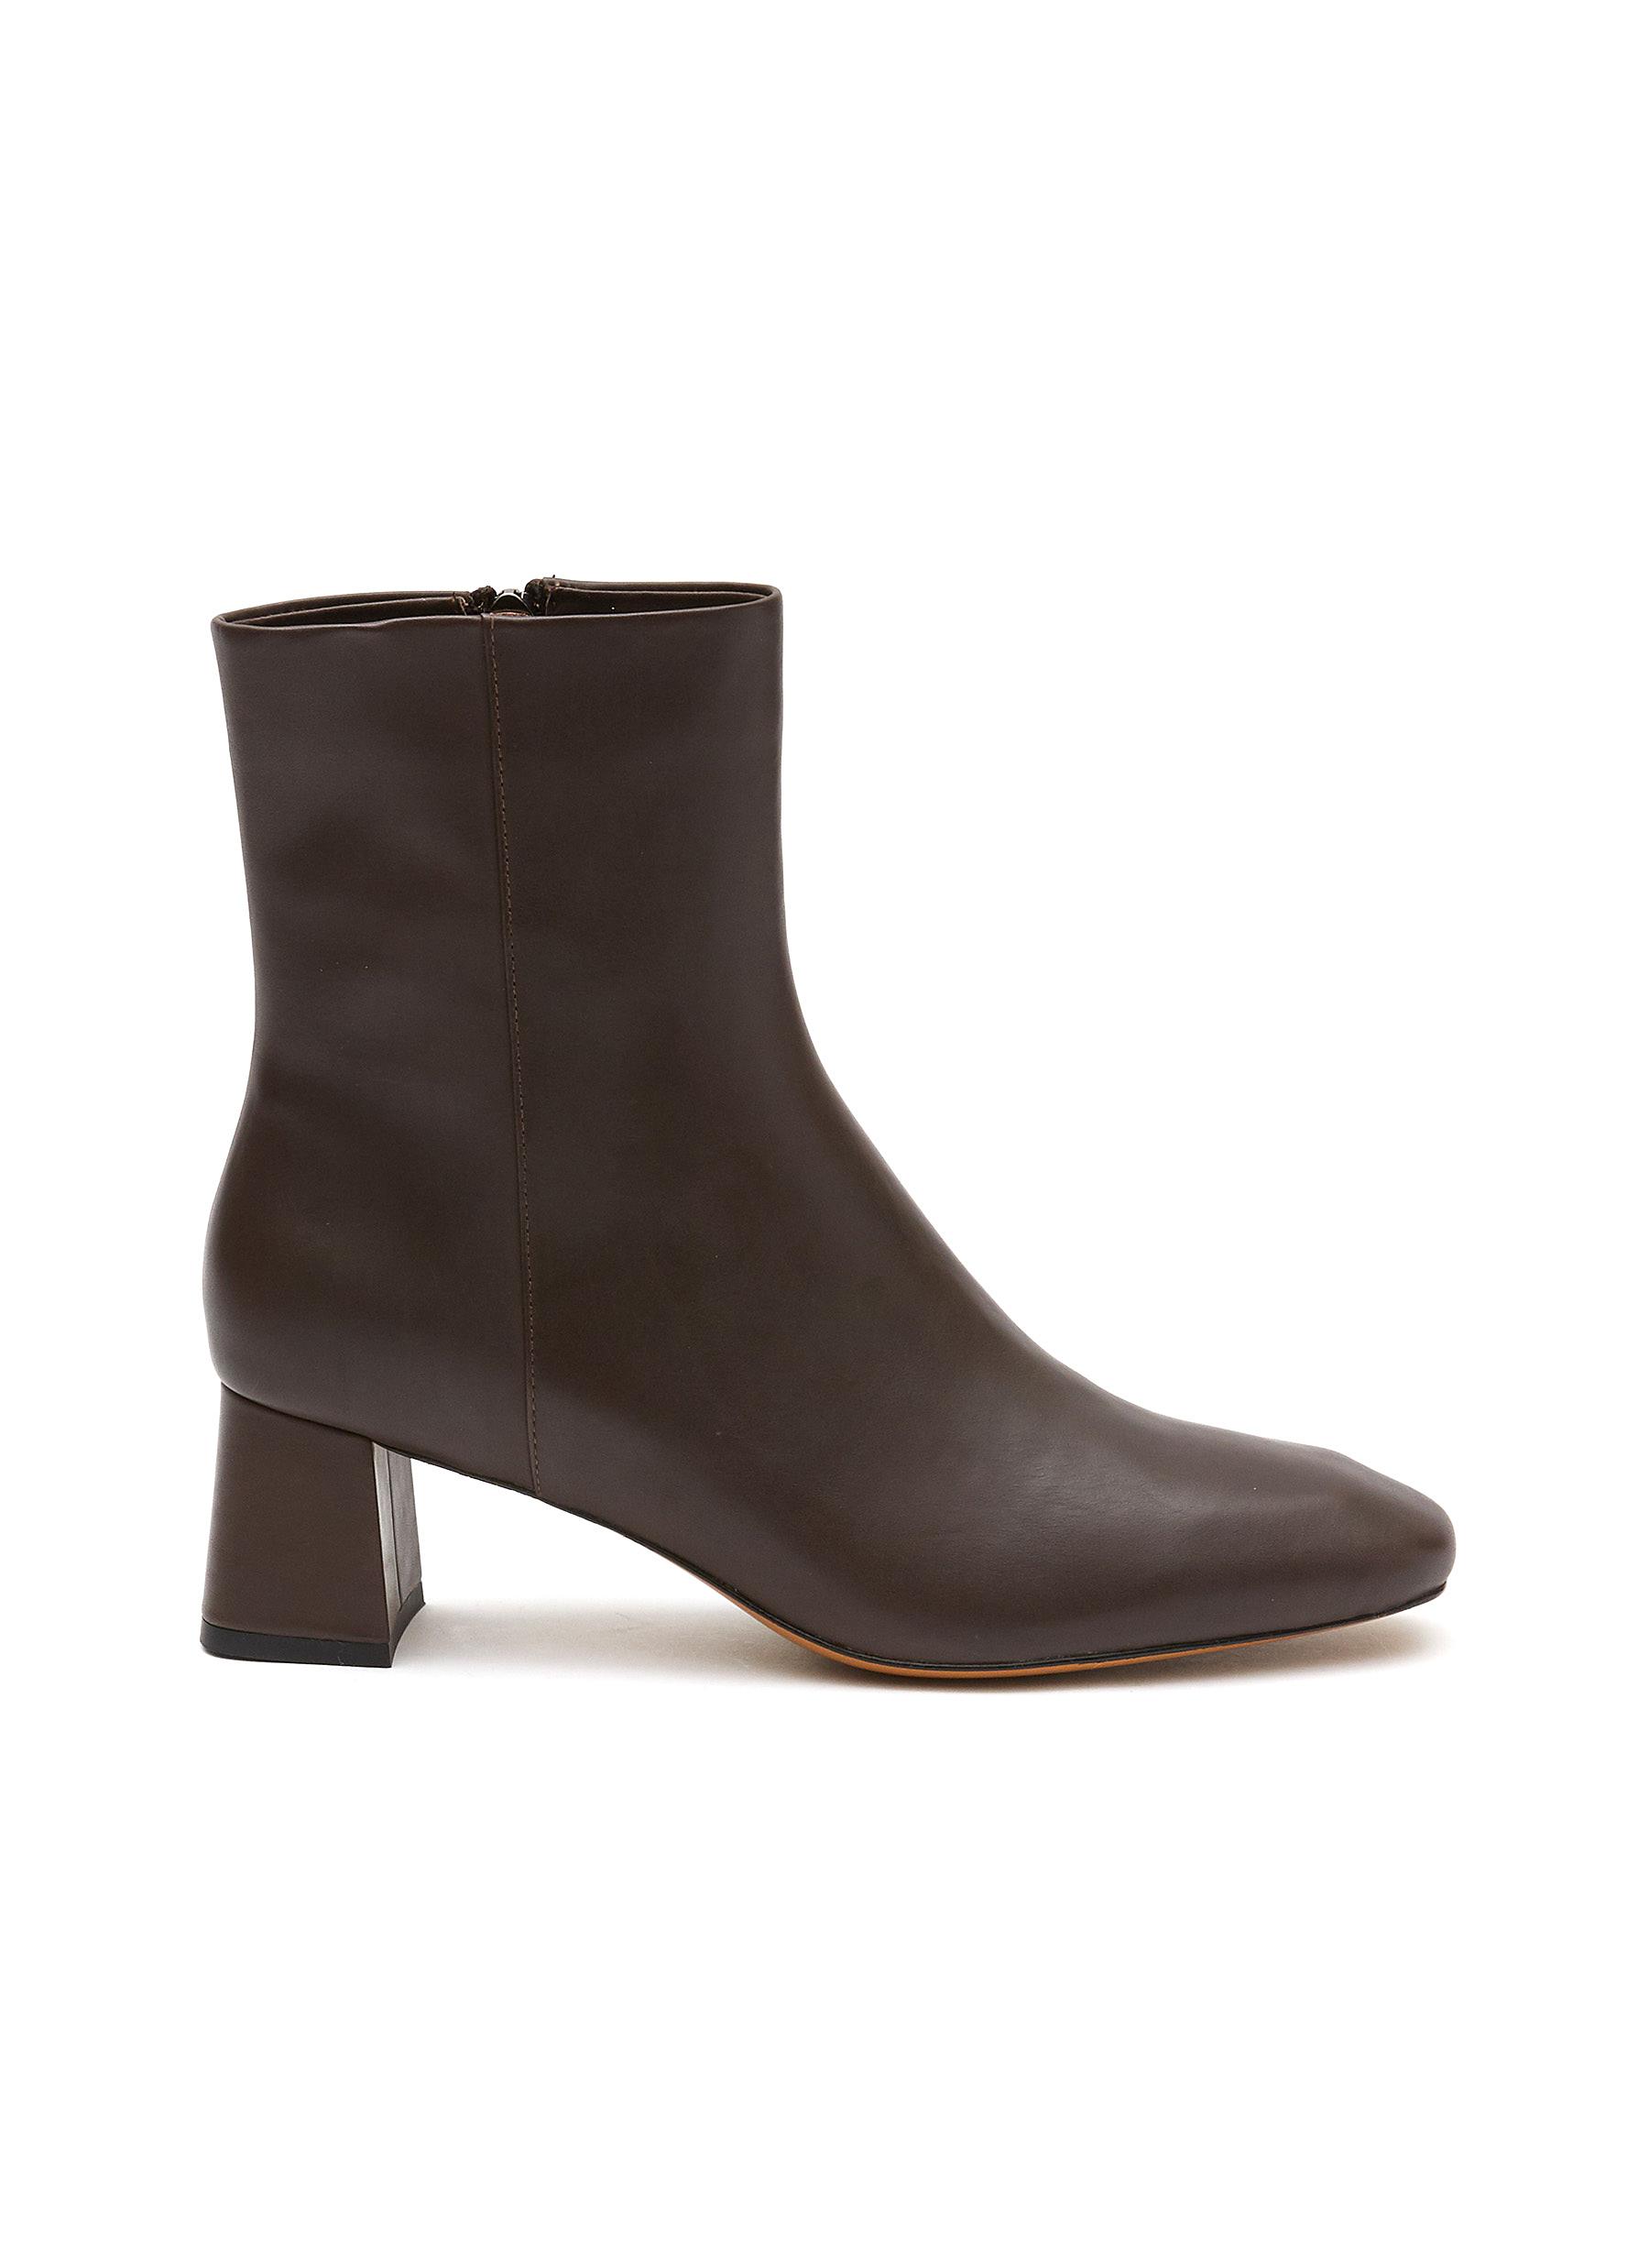 EQUIL ‘Firenze' 45 Leather Heeled Ankle Boots